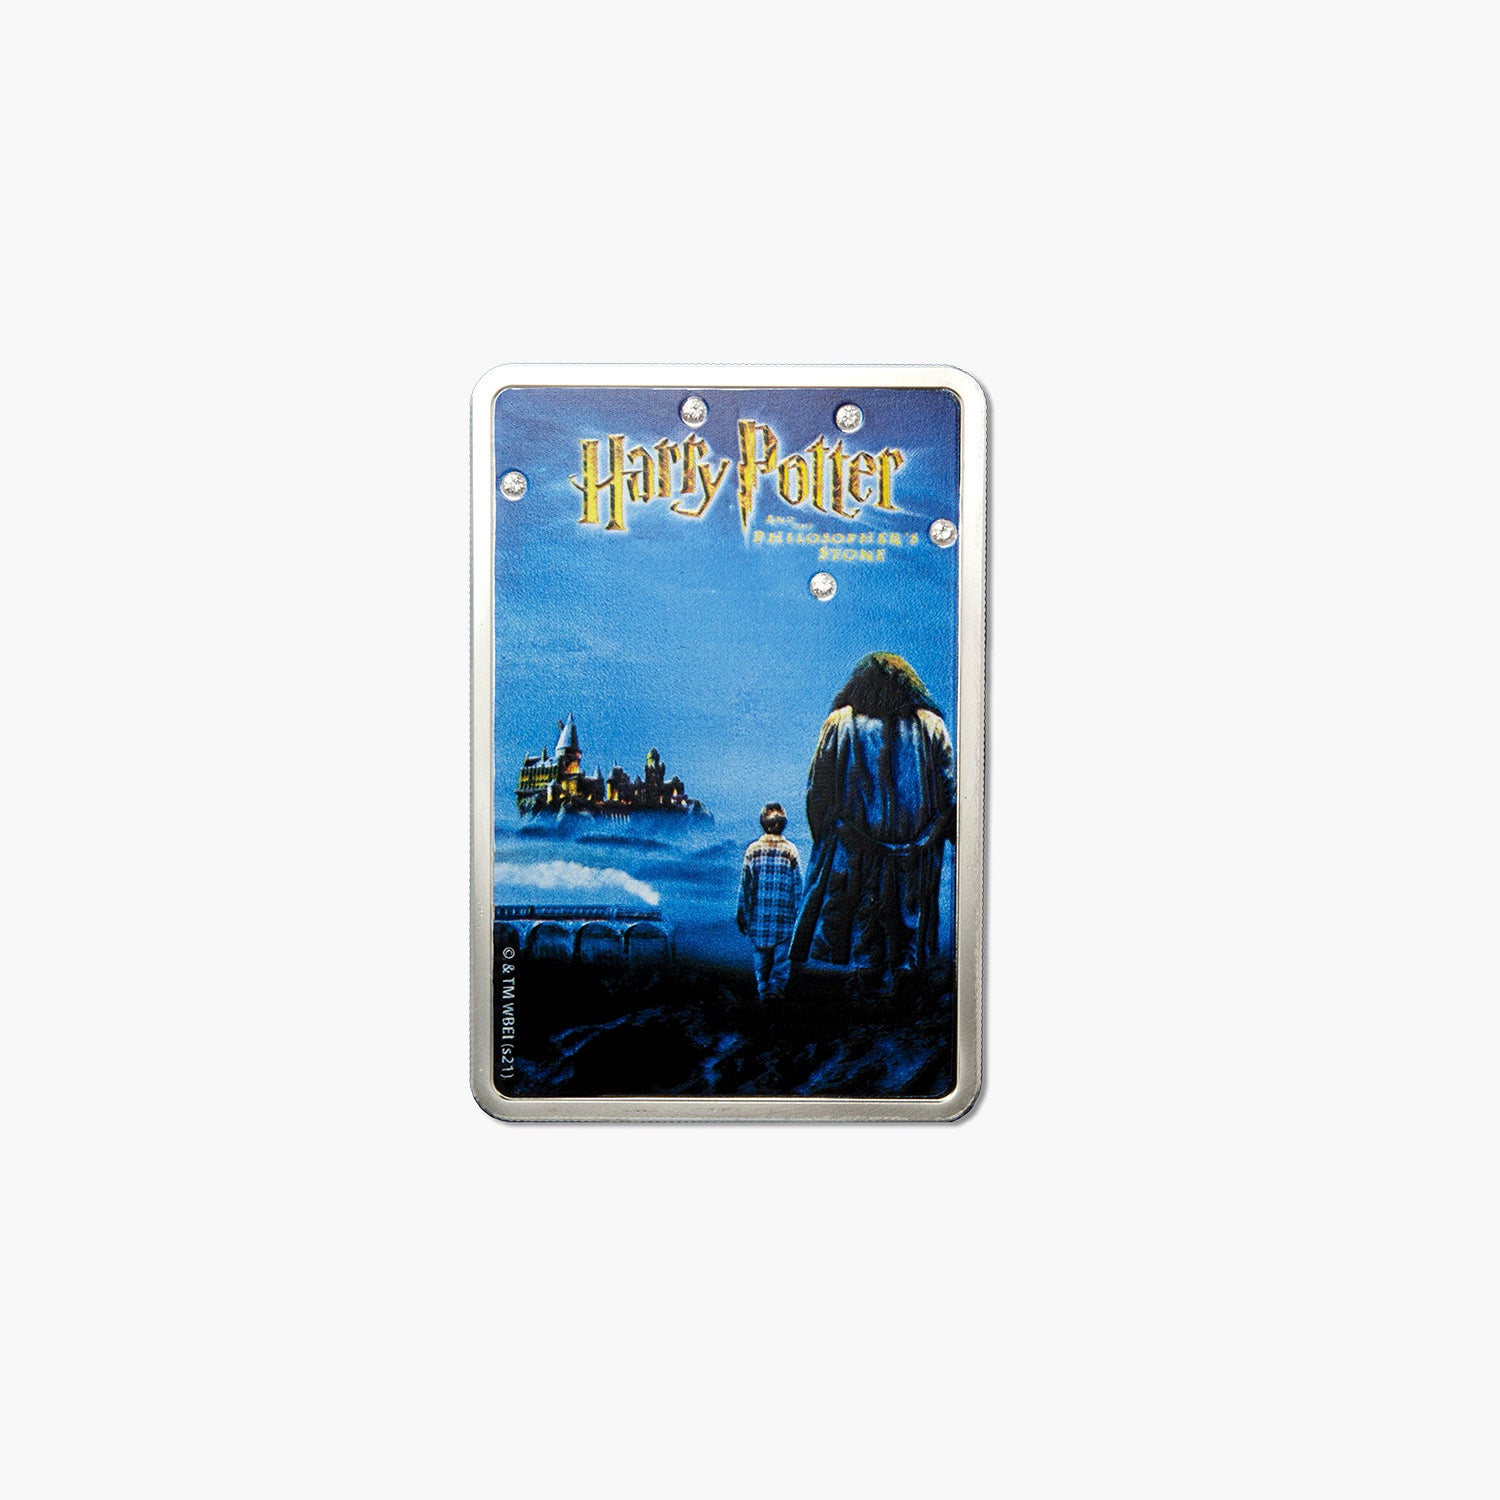 The Official Harry Potter Movie Poster Solid Silver Anniversary Coin Bar